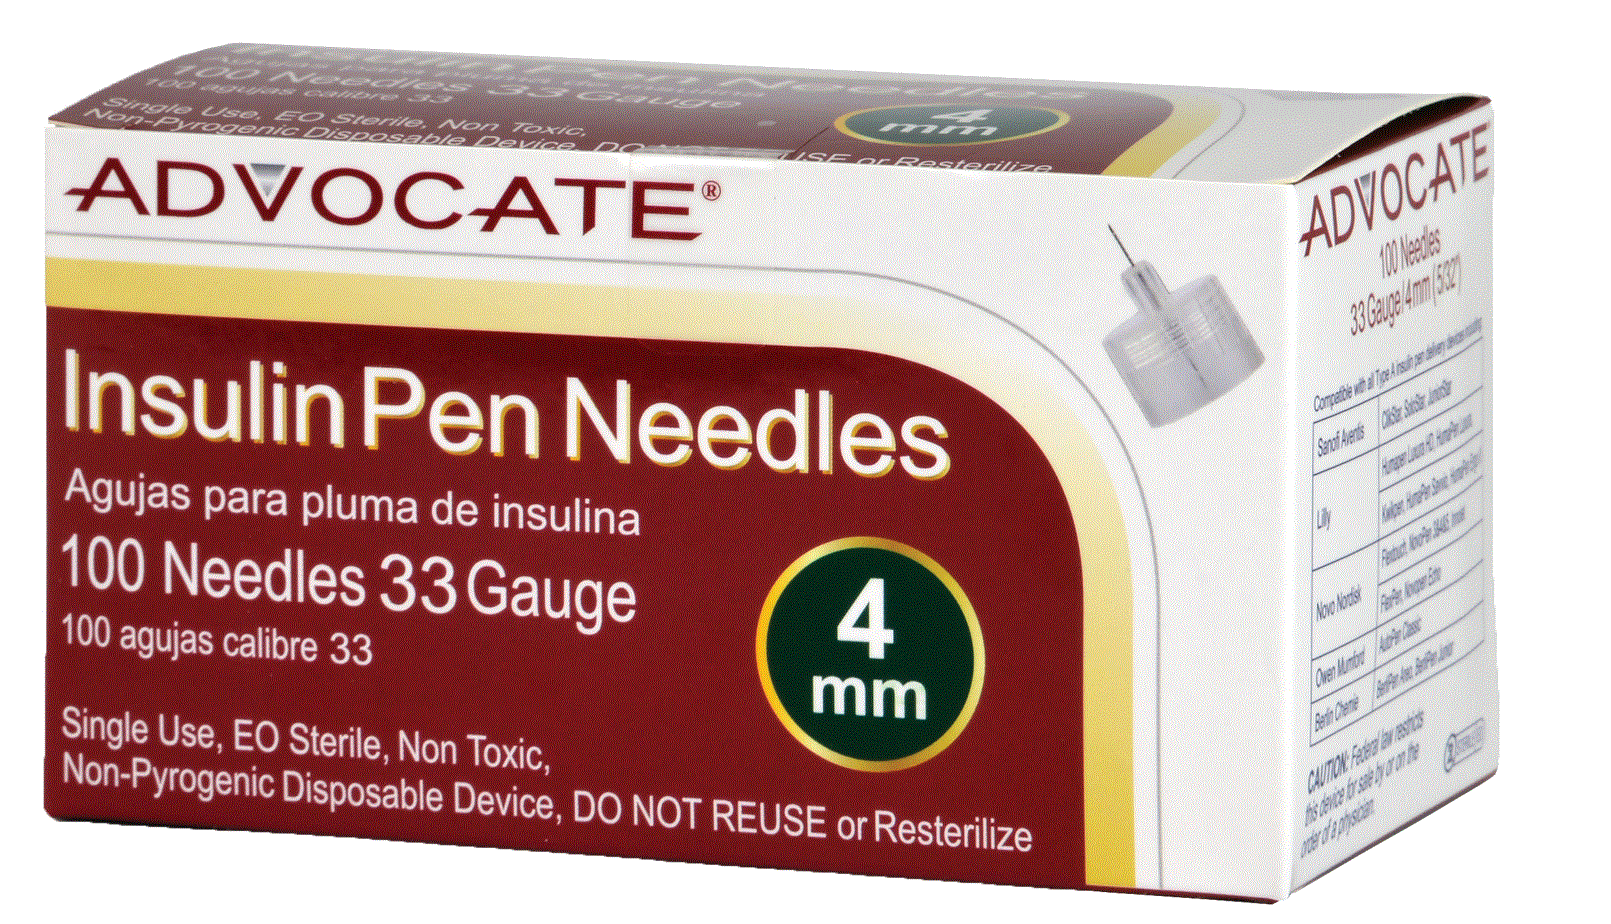 Insulin Pen Needles Products, Supplies and Equipment